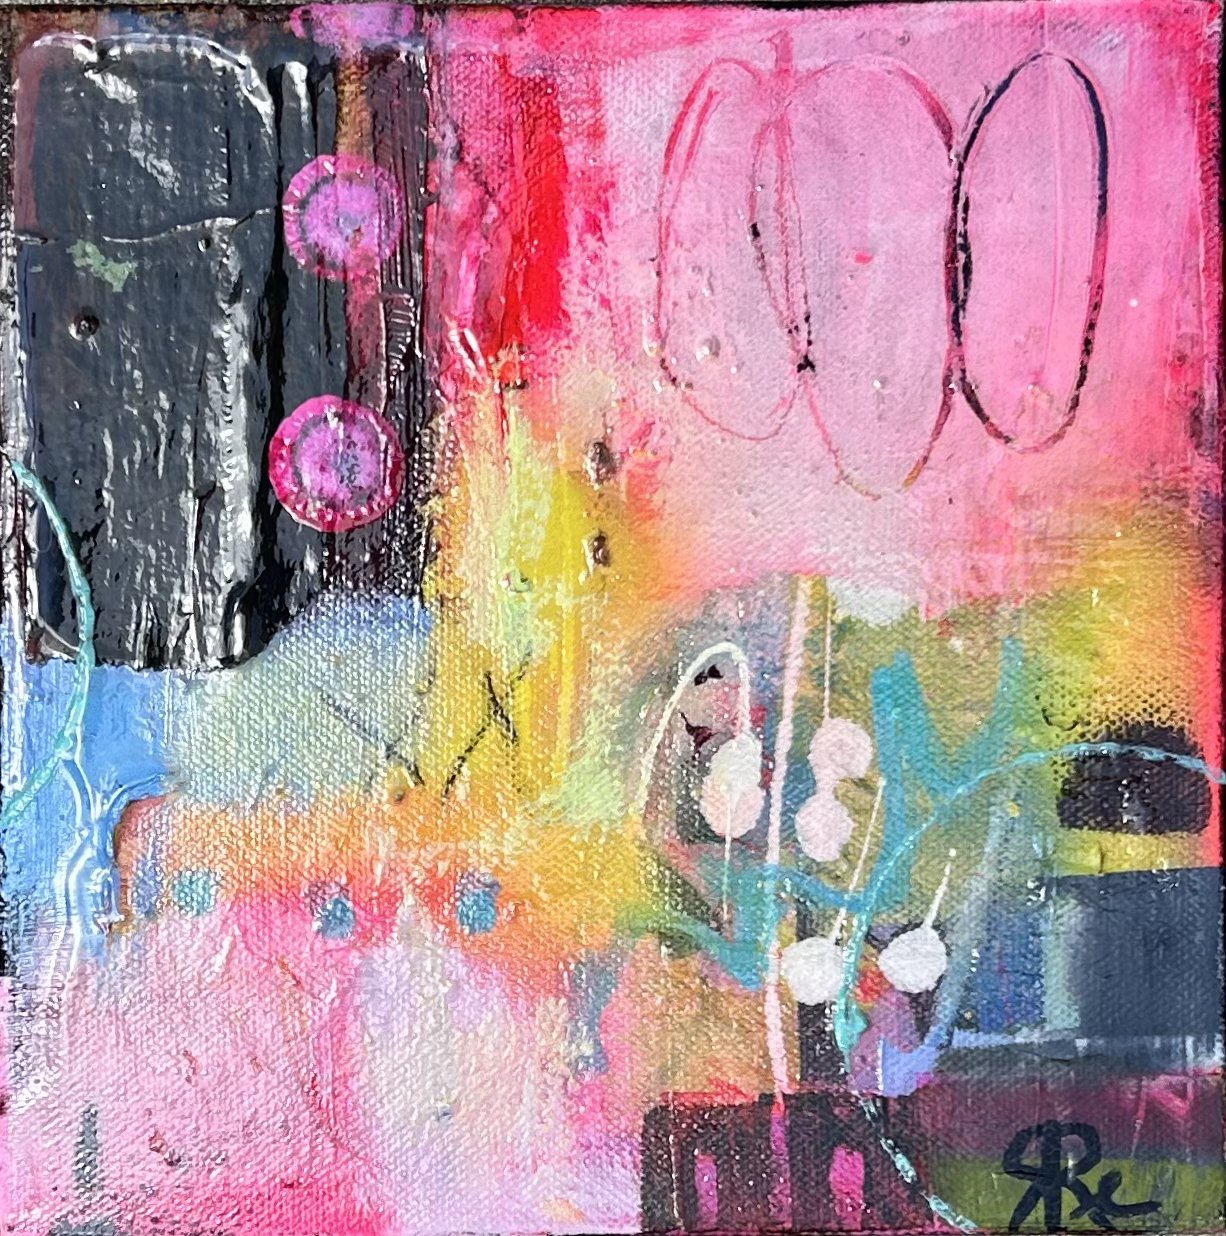 Renee loves to experiment with colors - especially pink. &quot;Explosions of Pink&quot; measures 8&rdquo; x 8&rdquo; on canvas.

View this piece at the 🔗 in bio or in person at @culturalartsalliance's ArtsQuest this weekend 5/4 - 5/5 in booth 43 in 